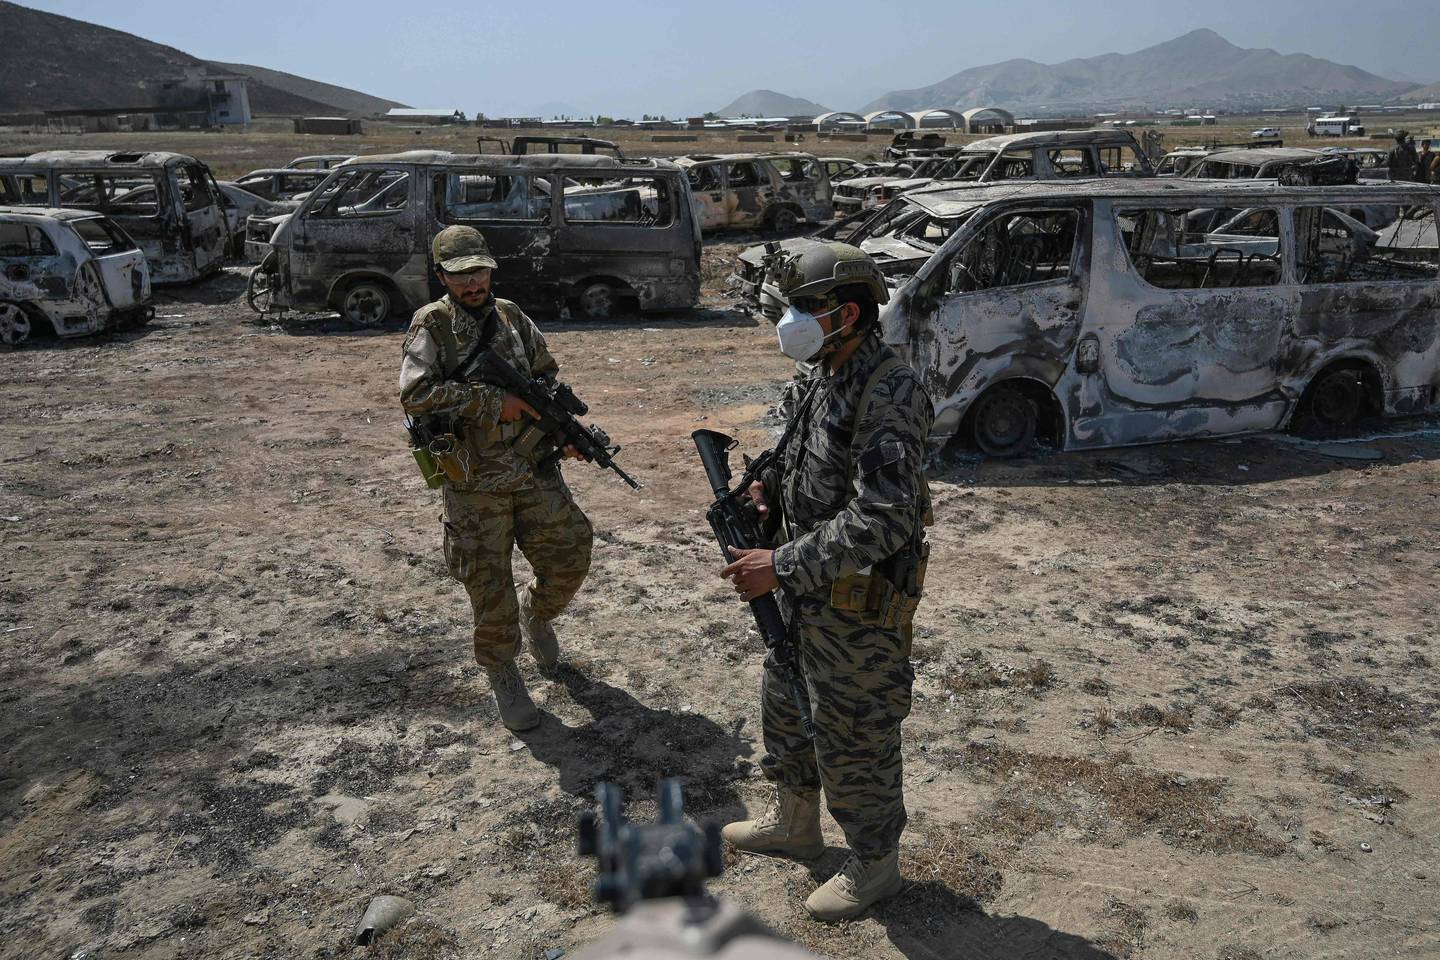 Members of the Taliban Badri 313 military unit stand beside damaged vehicles kept near the destroyed Central Intelligence Agency (CIA) base in Deh Sabz district. AFP
